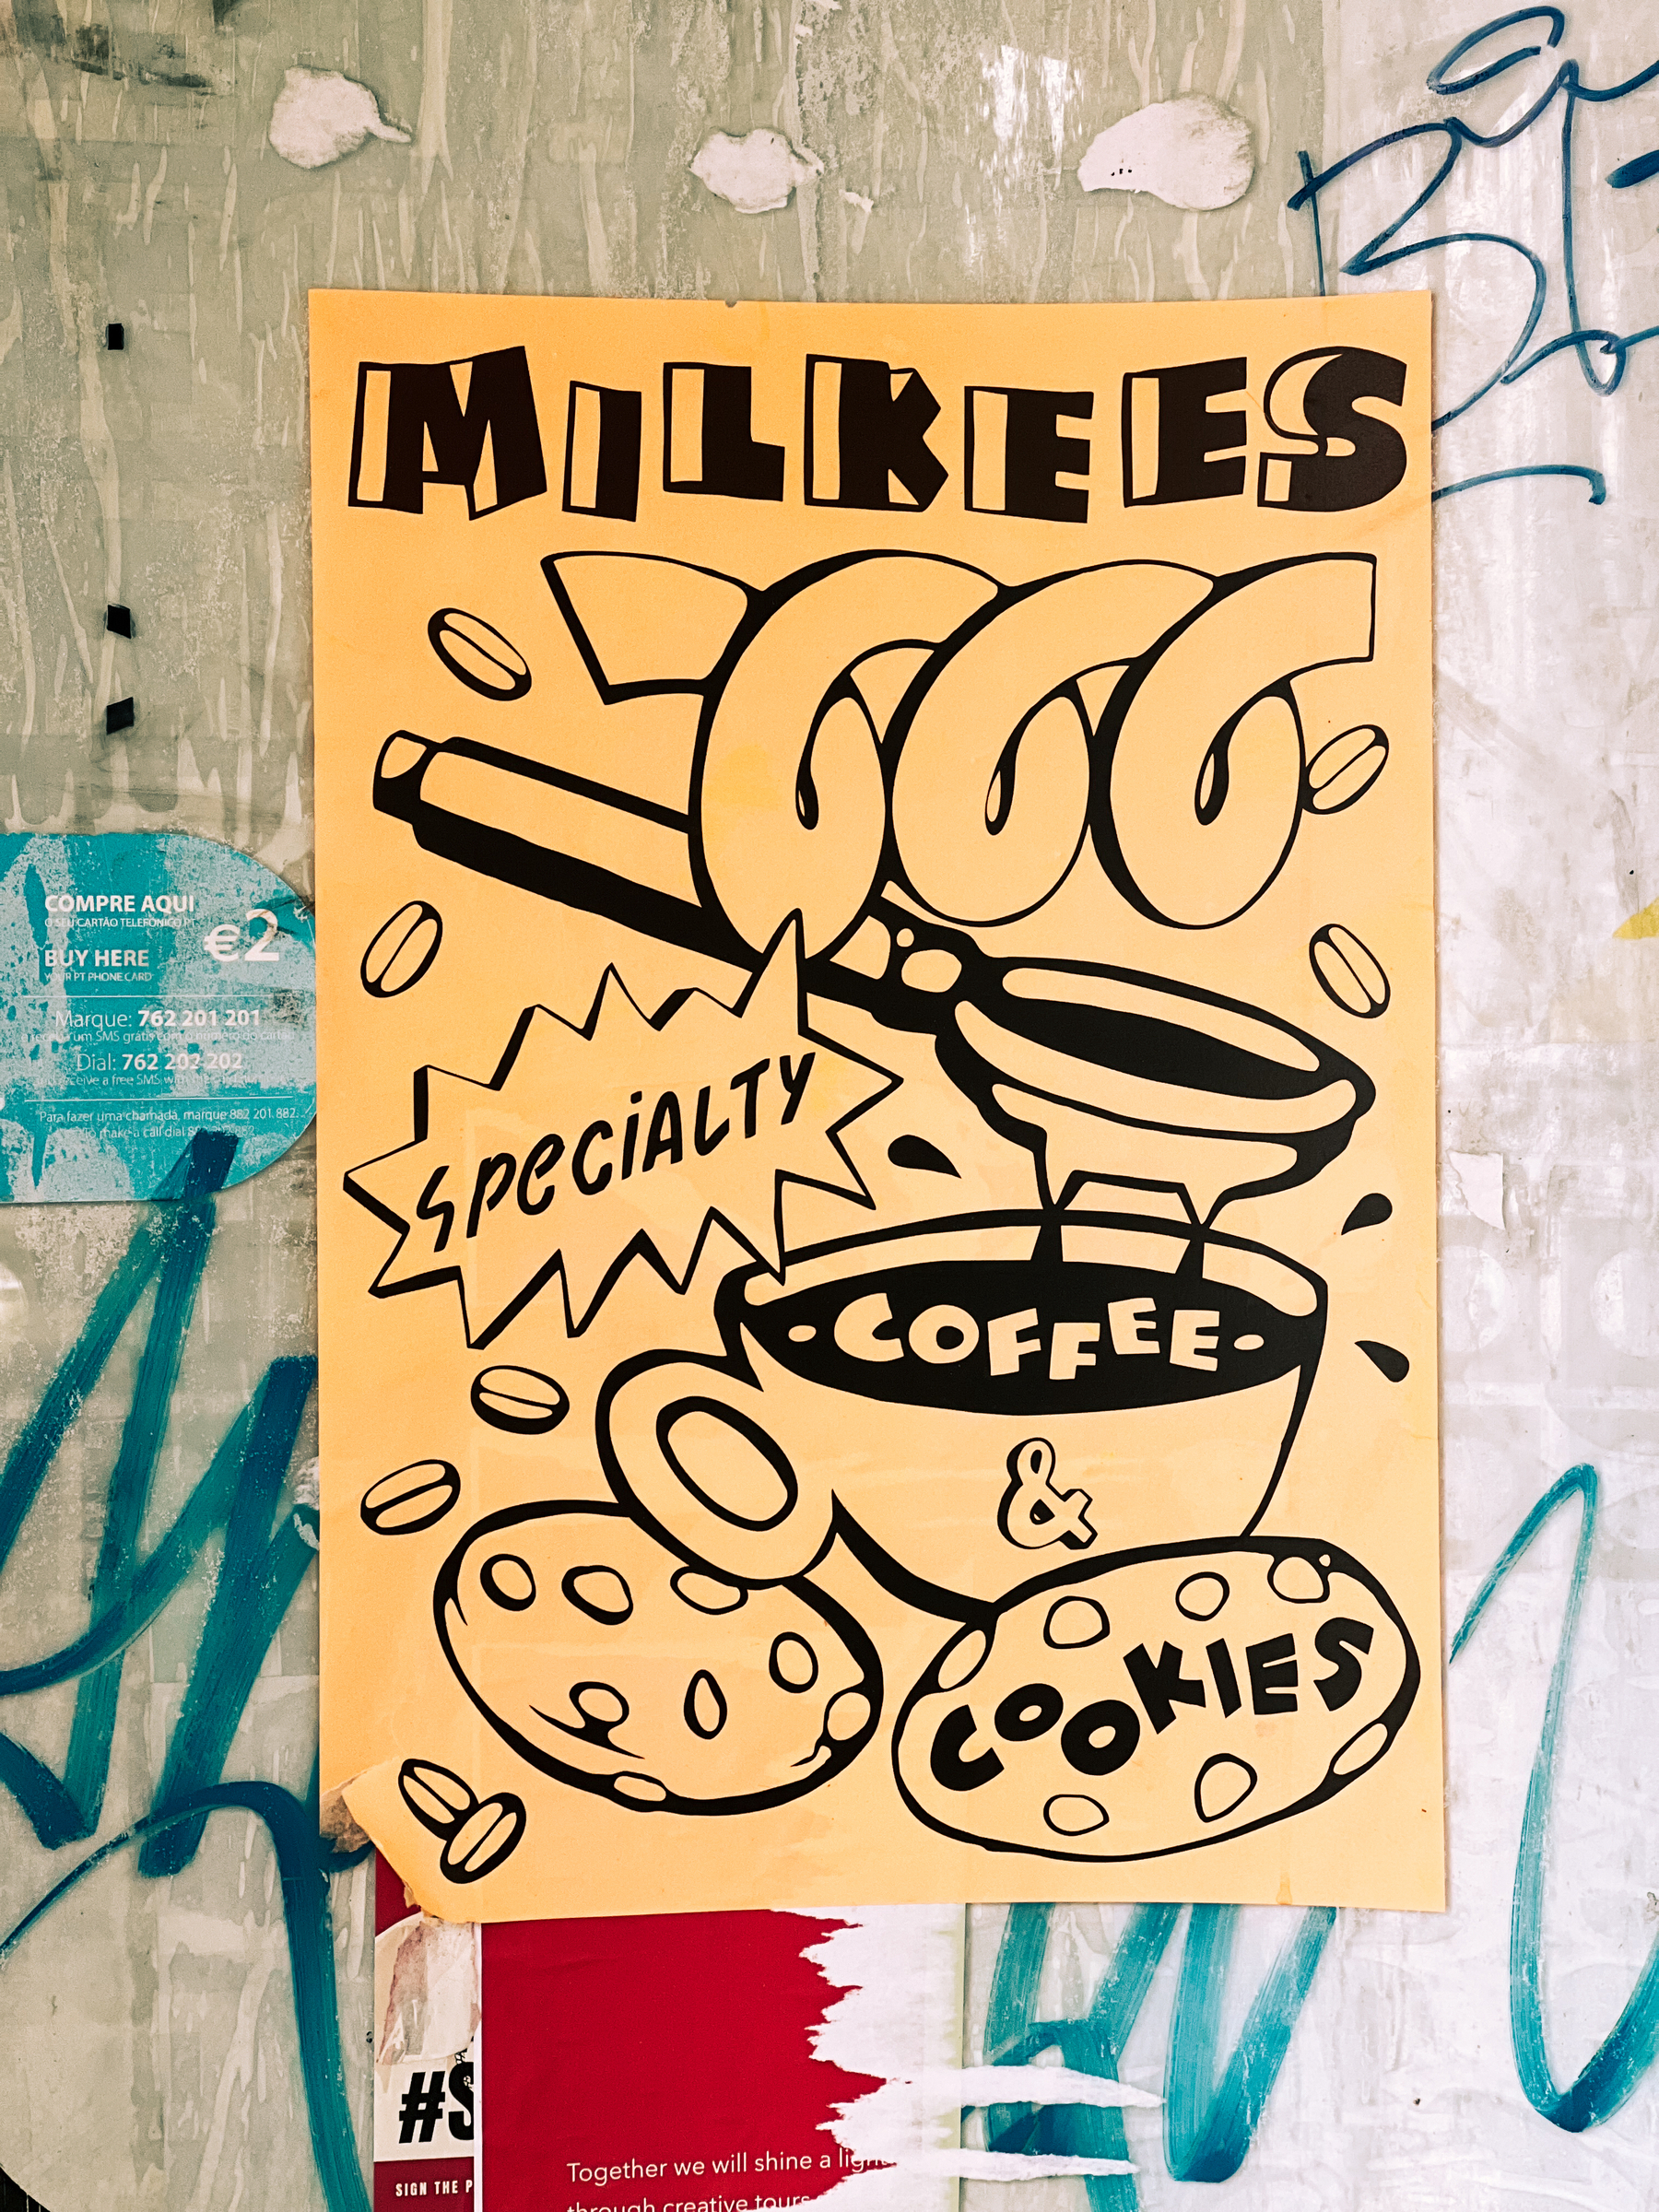 A poster. Milkees, advertising coffee and cookies. 